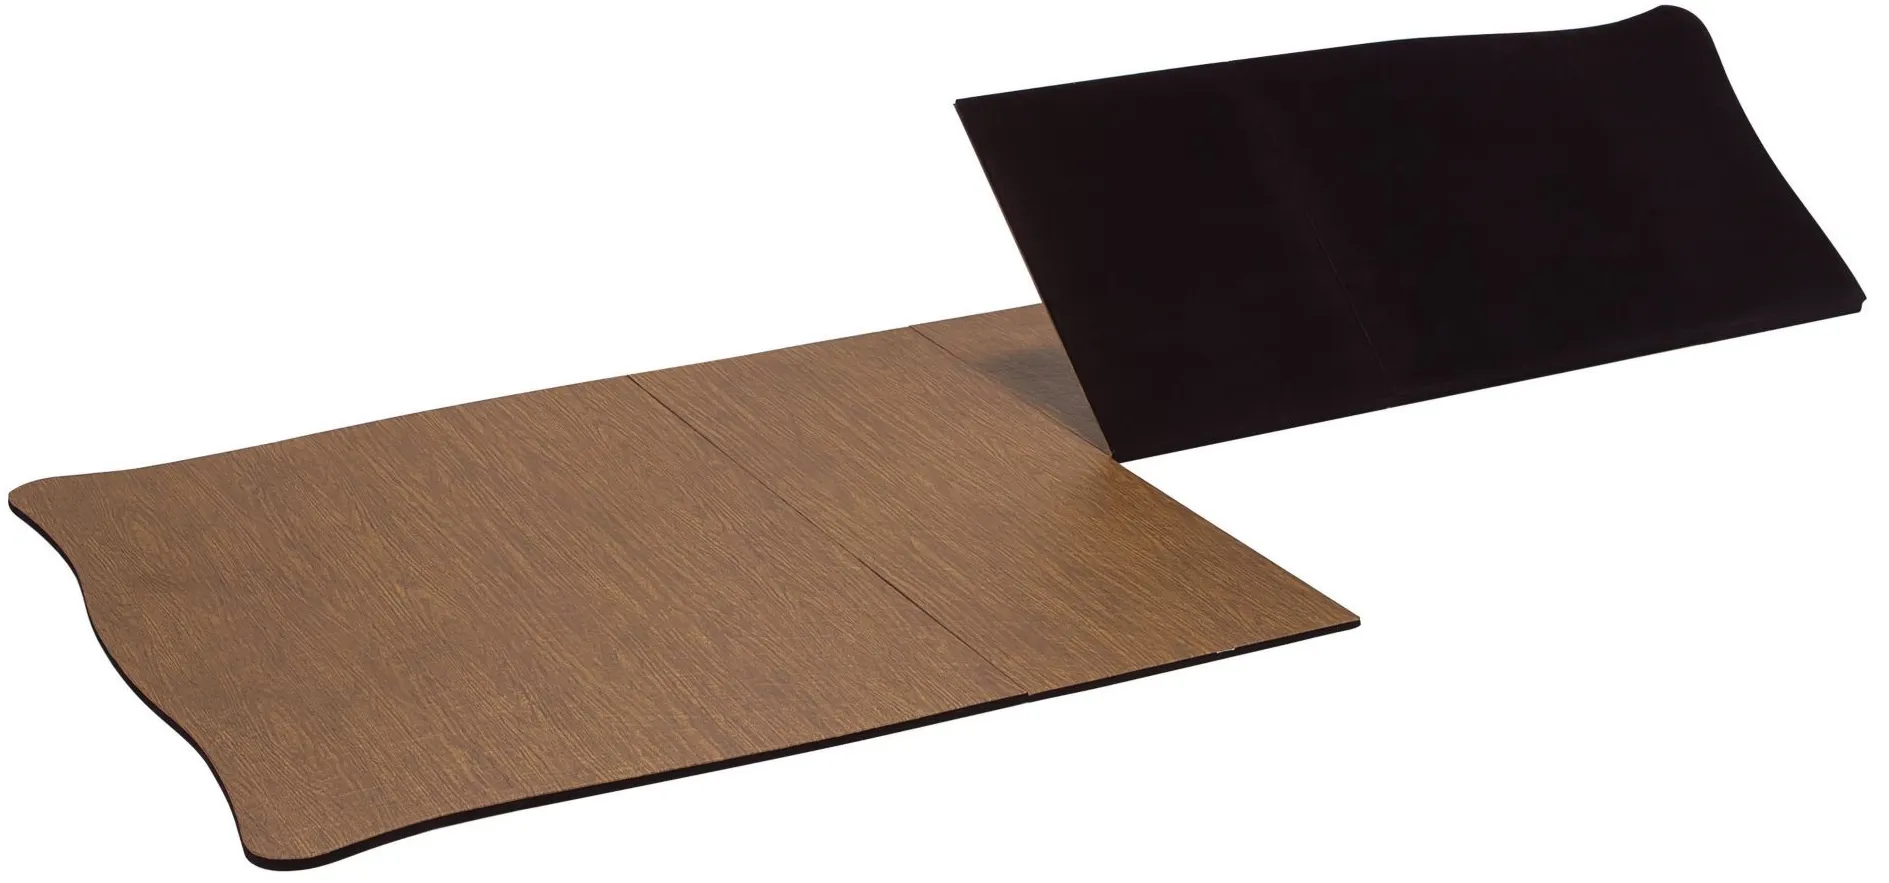 Bradford Heights Dining Table Protector in Oak / Brown by International Table Pads